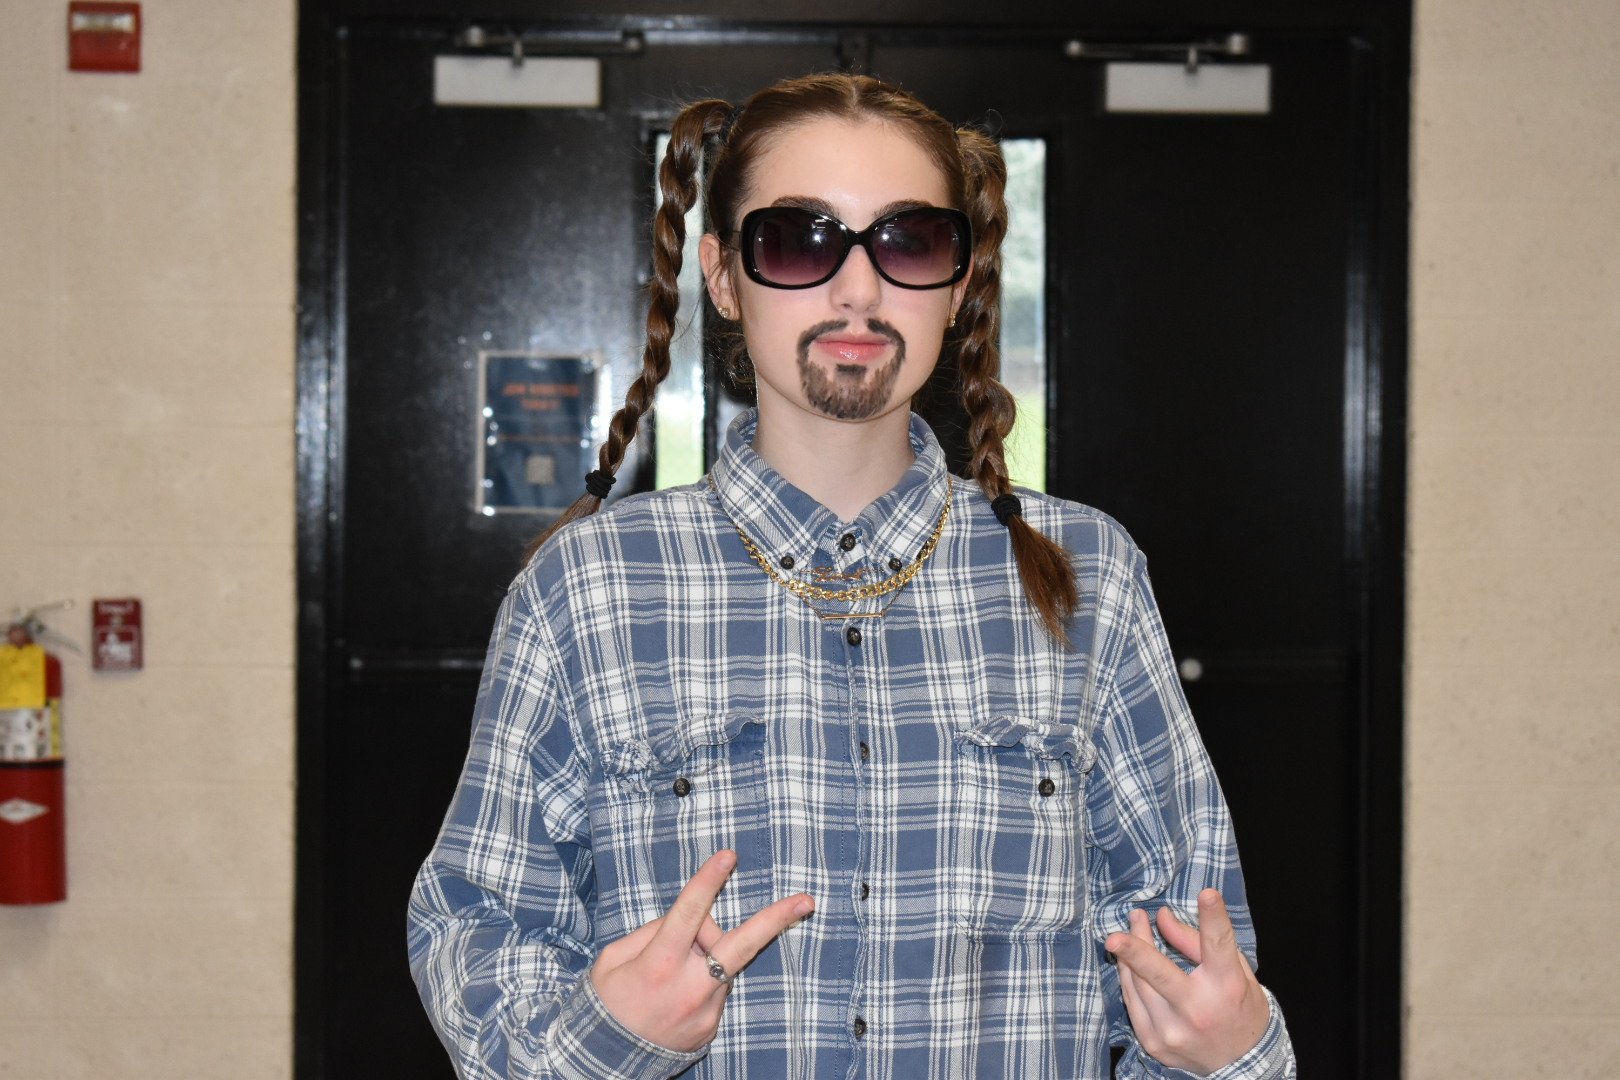  Samantha Fussell (11) dressed up as Snoop Dog for “ABC - Jackson 5” spirit day, where students dress up as something that begins with the first letter of their name. 